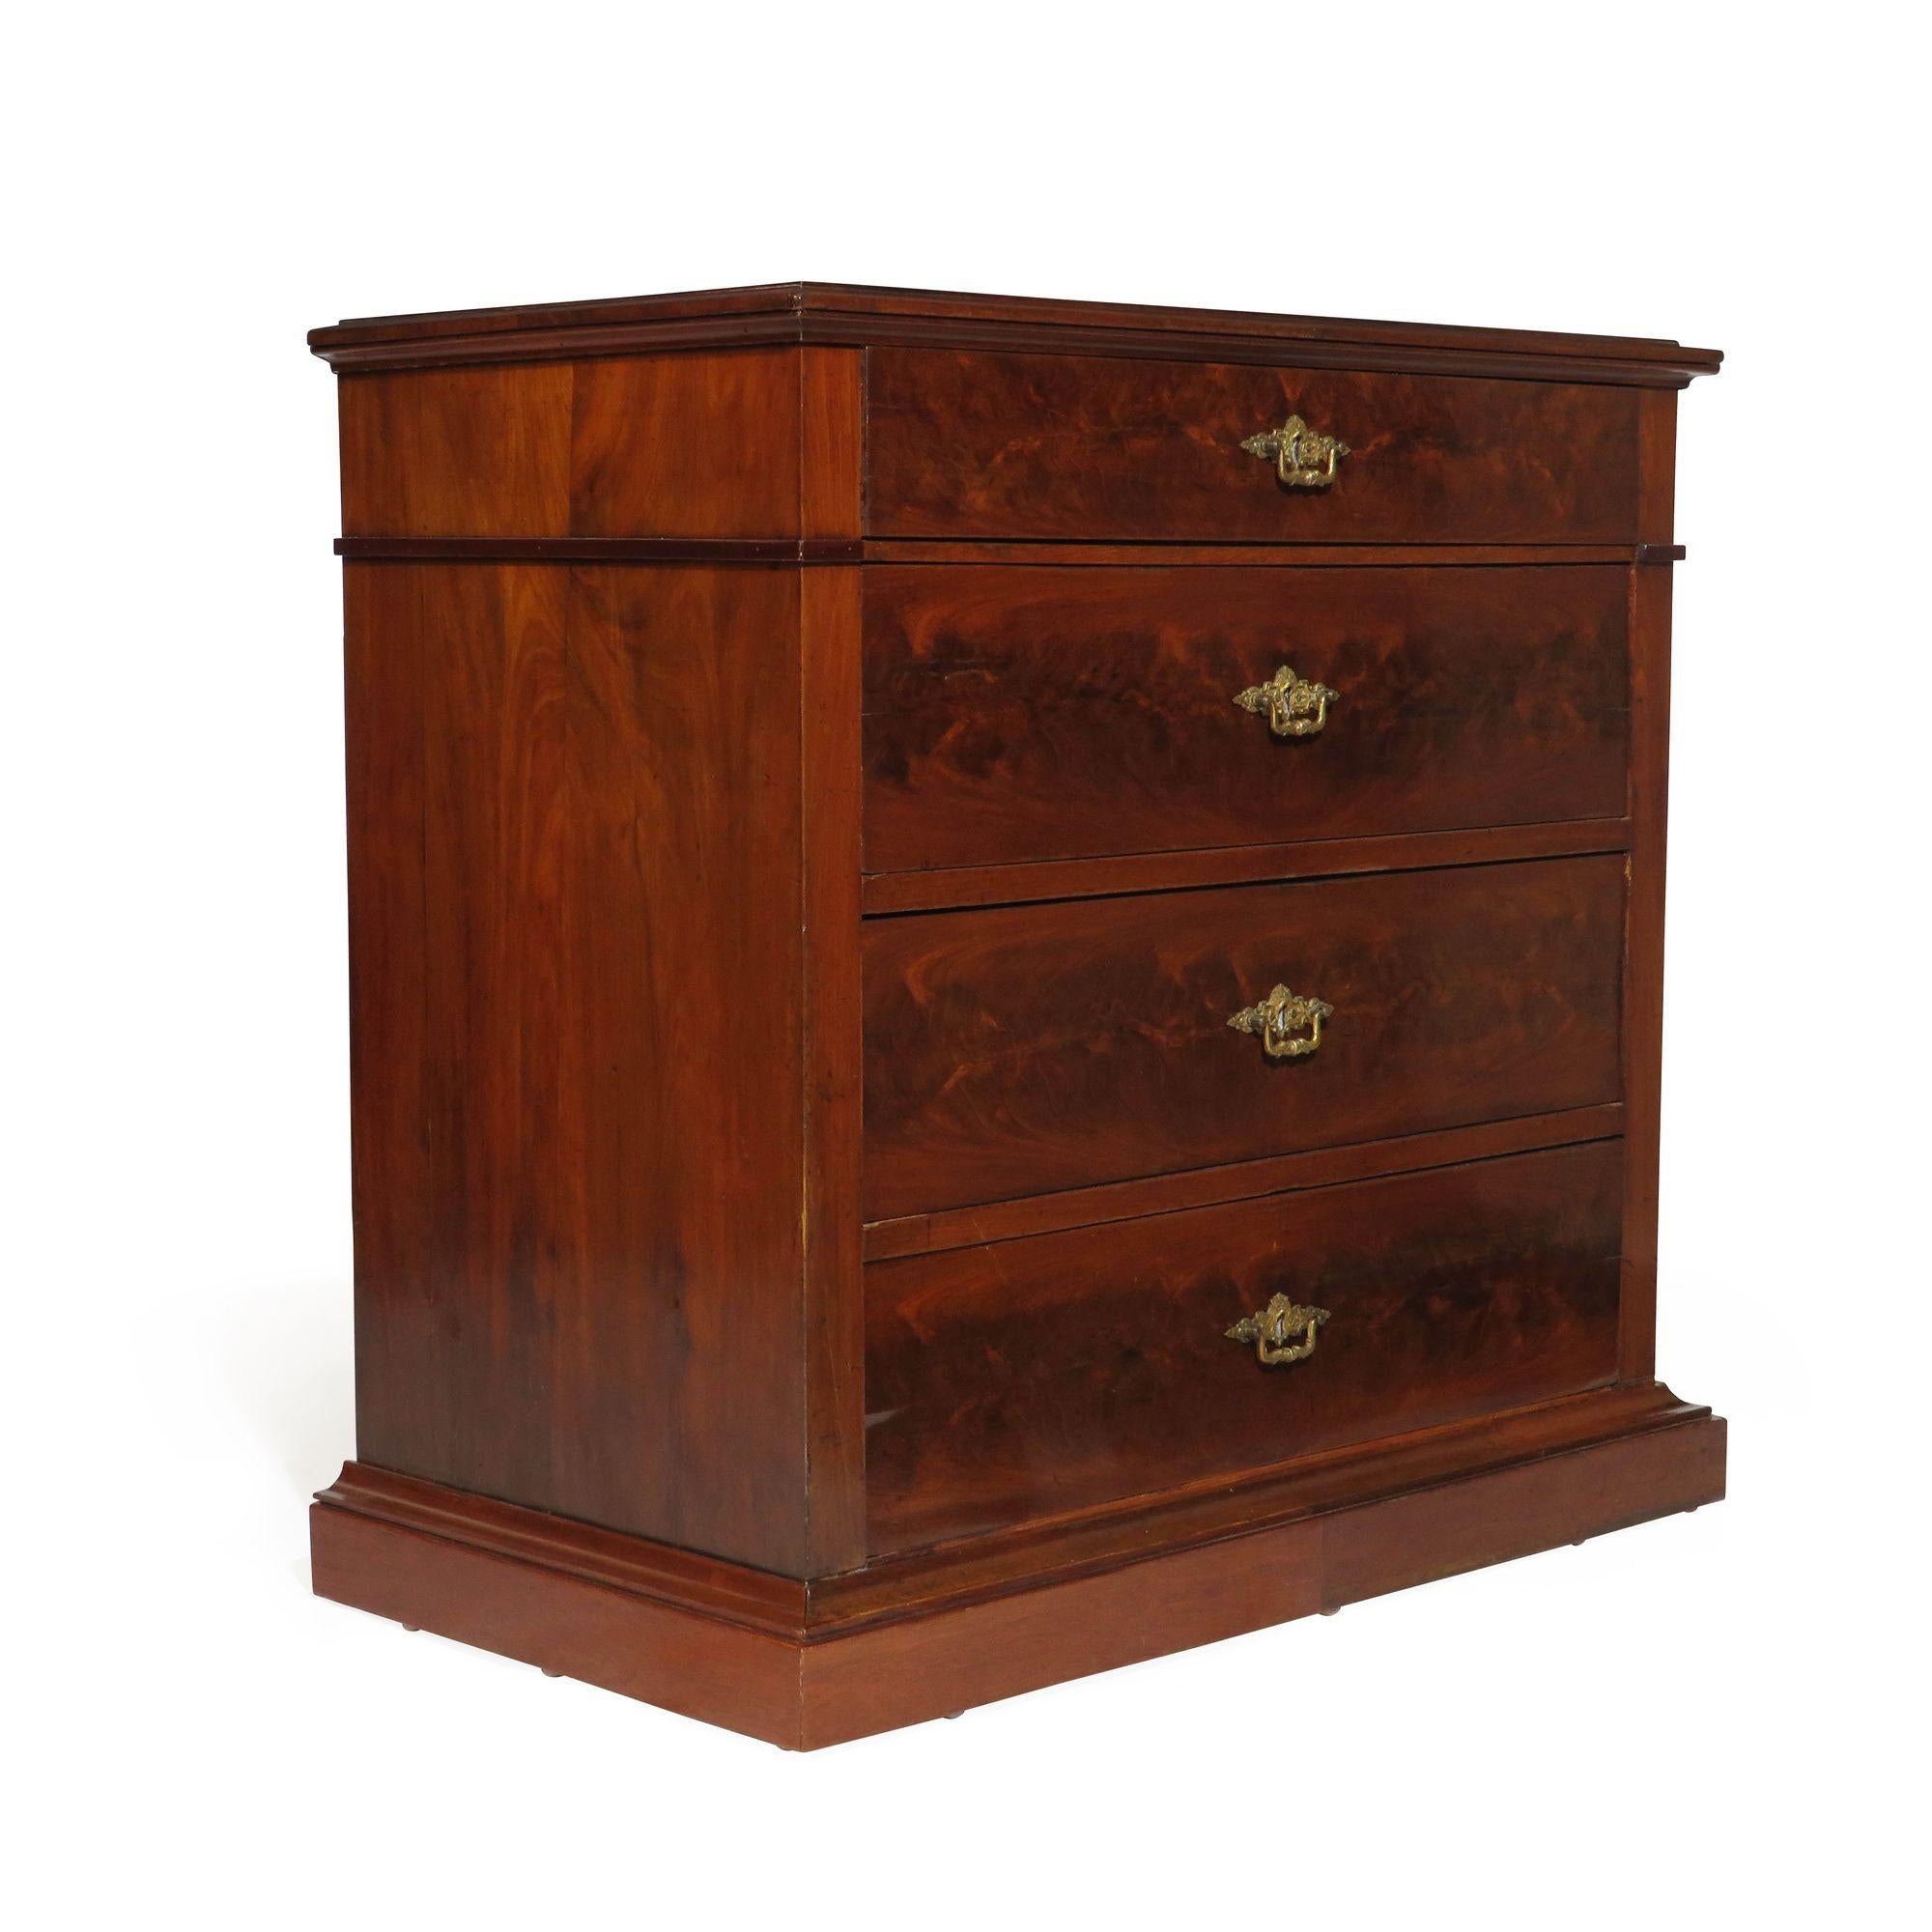 Late 19th Century Cuban Mahogany Biedermeier Chest of Drawers In Excellent Condition For Sale In Oakland, CA